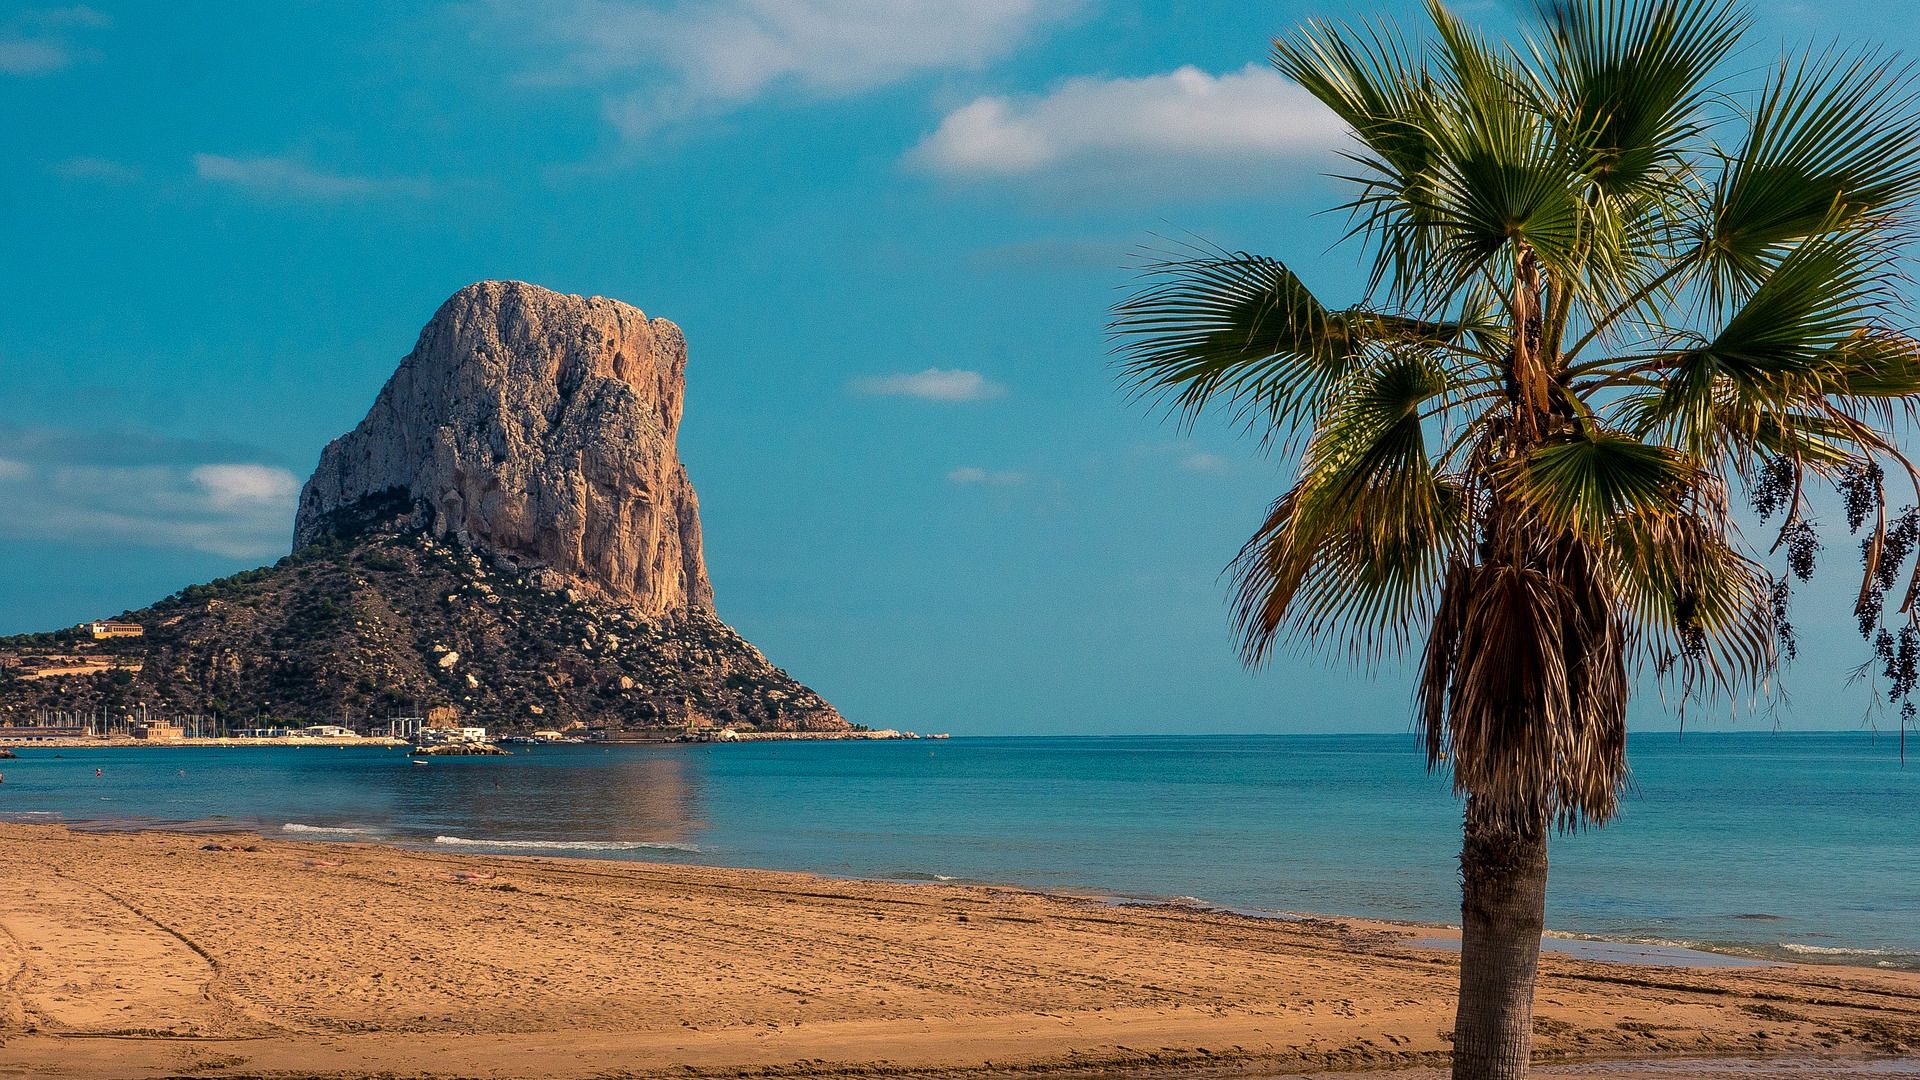 Desktop Wallpaper Spain Beach, Tree, Sand, Mountains, Cliff, HD Image, Picture, Background, Gv4qla